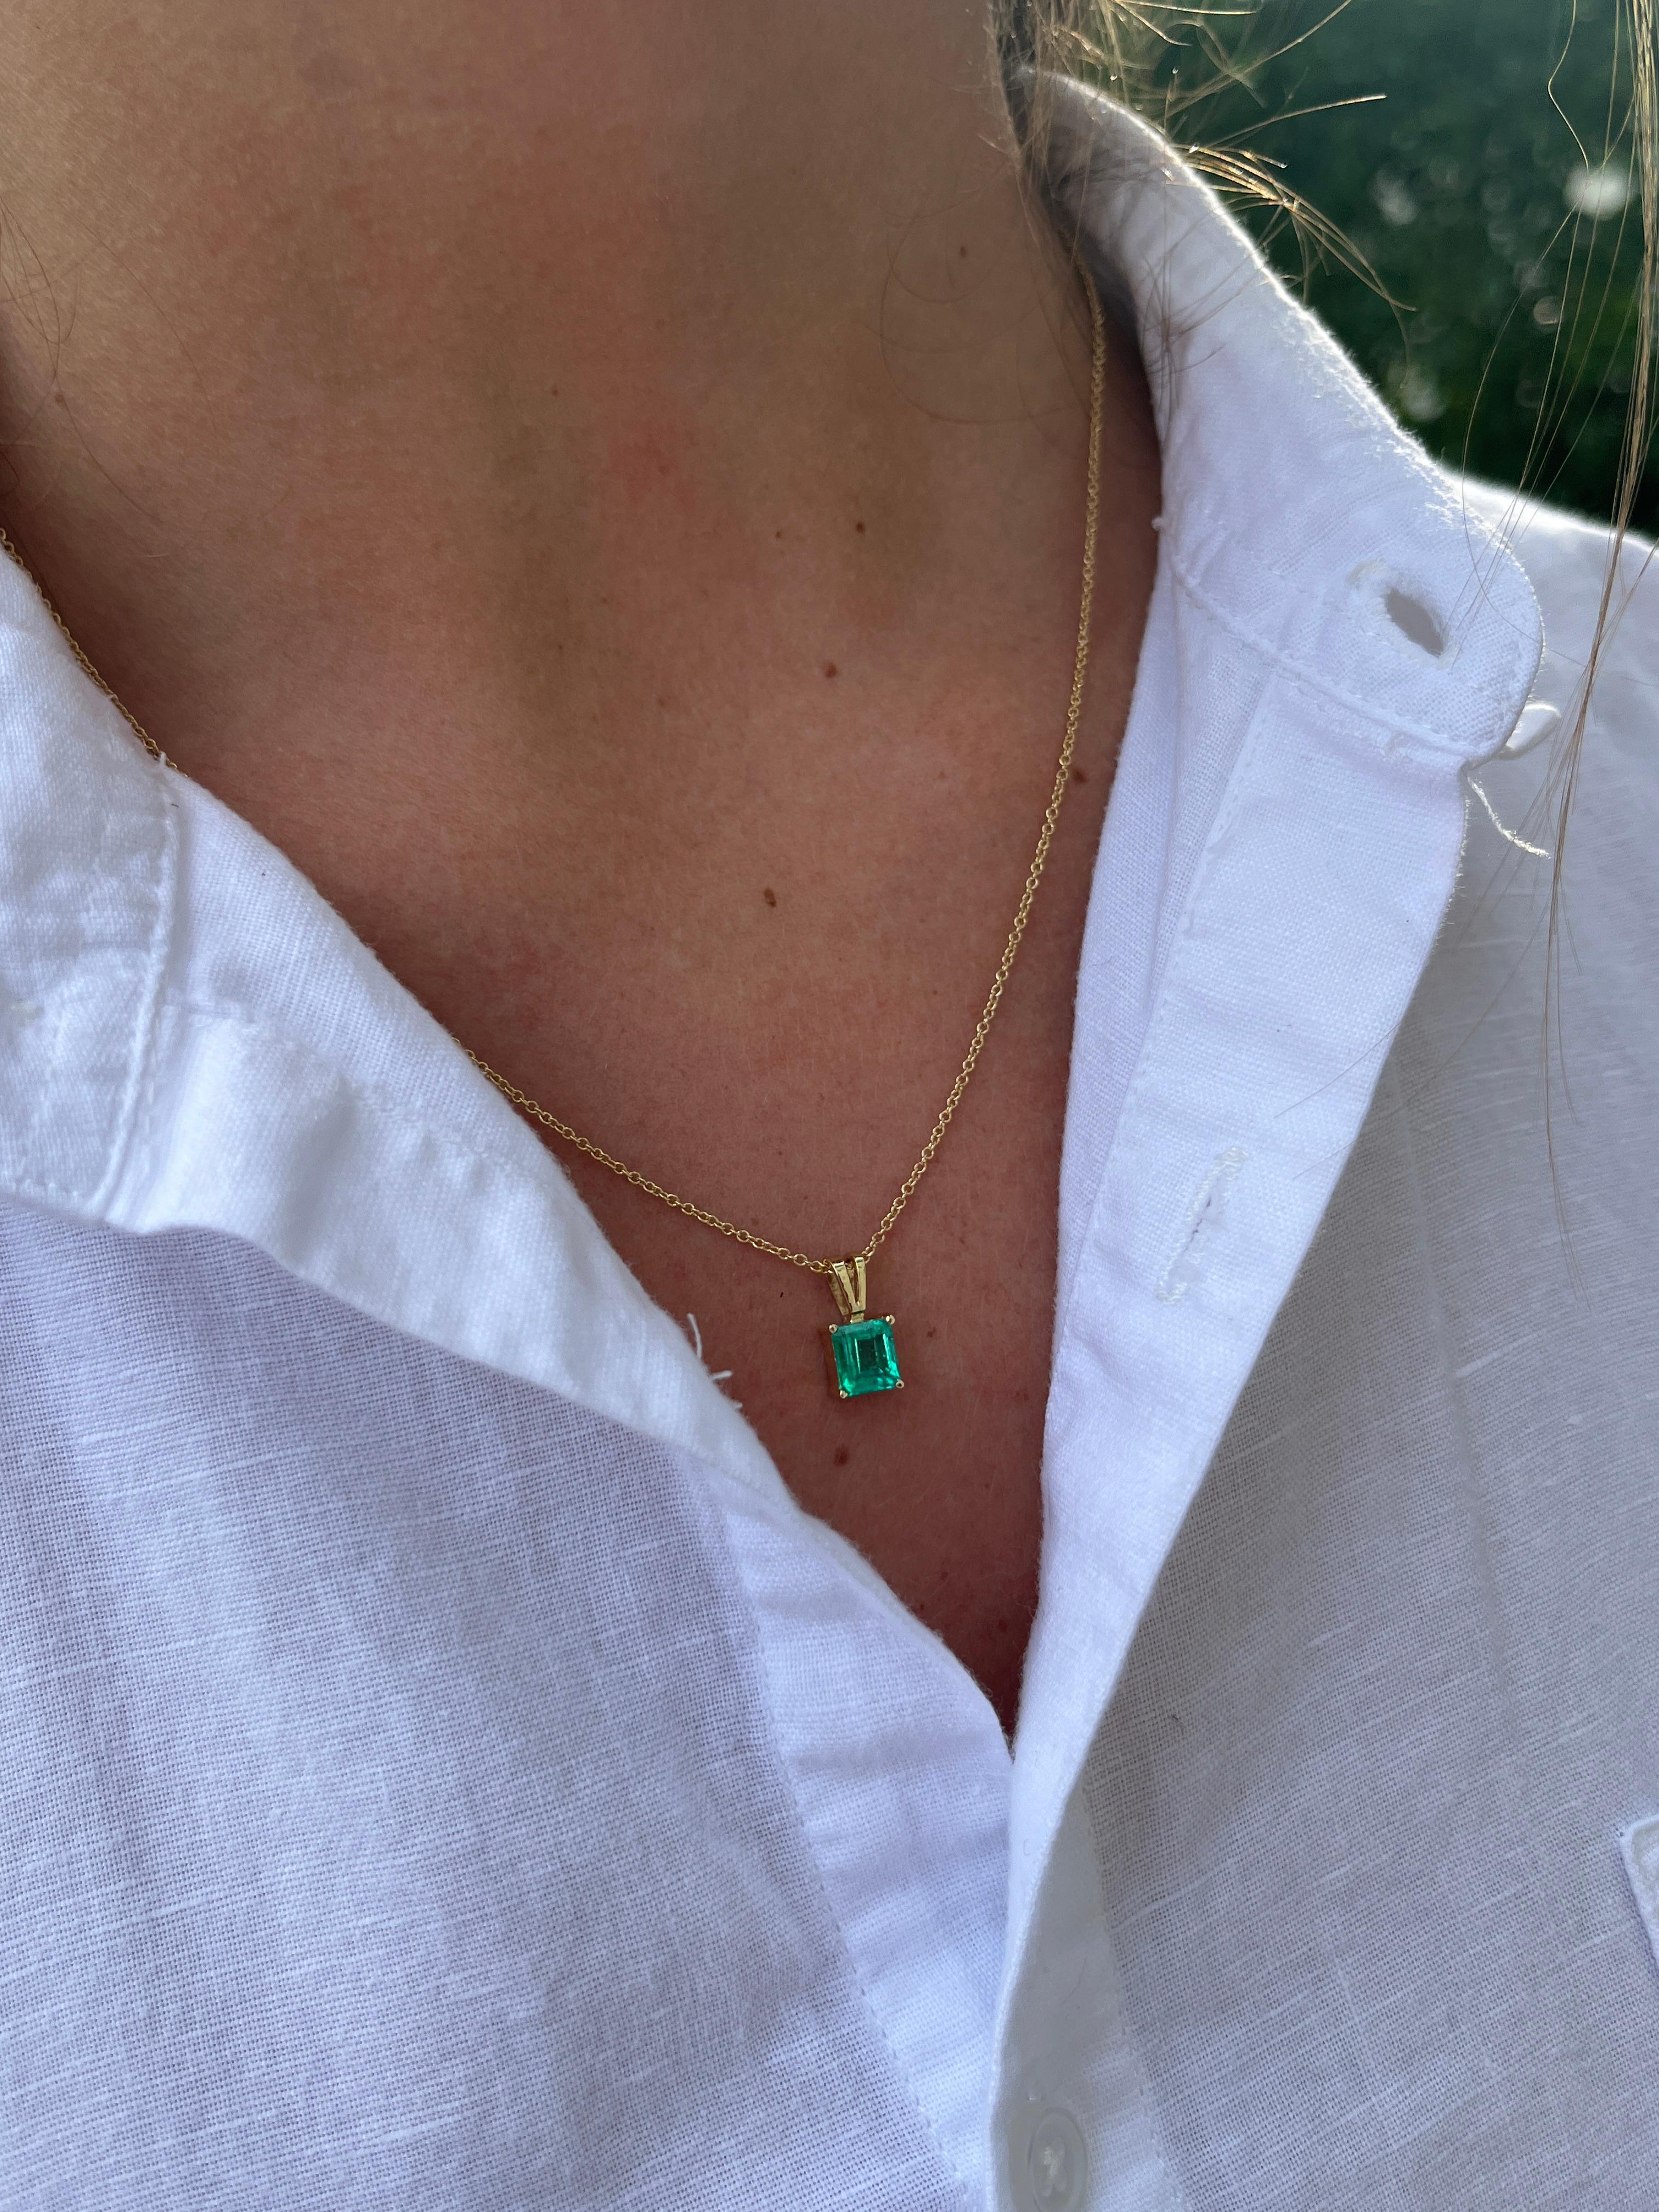 1.20 Carat Colombian Emerald Solitaire Pendant Necklace in 18K Yellow Gold 1